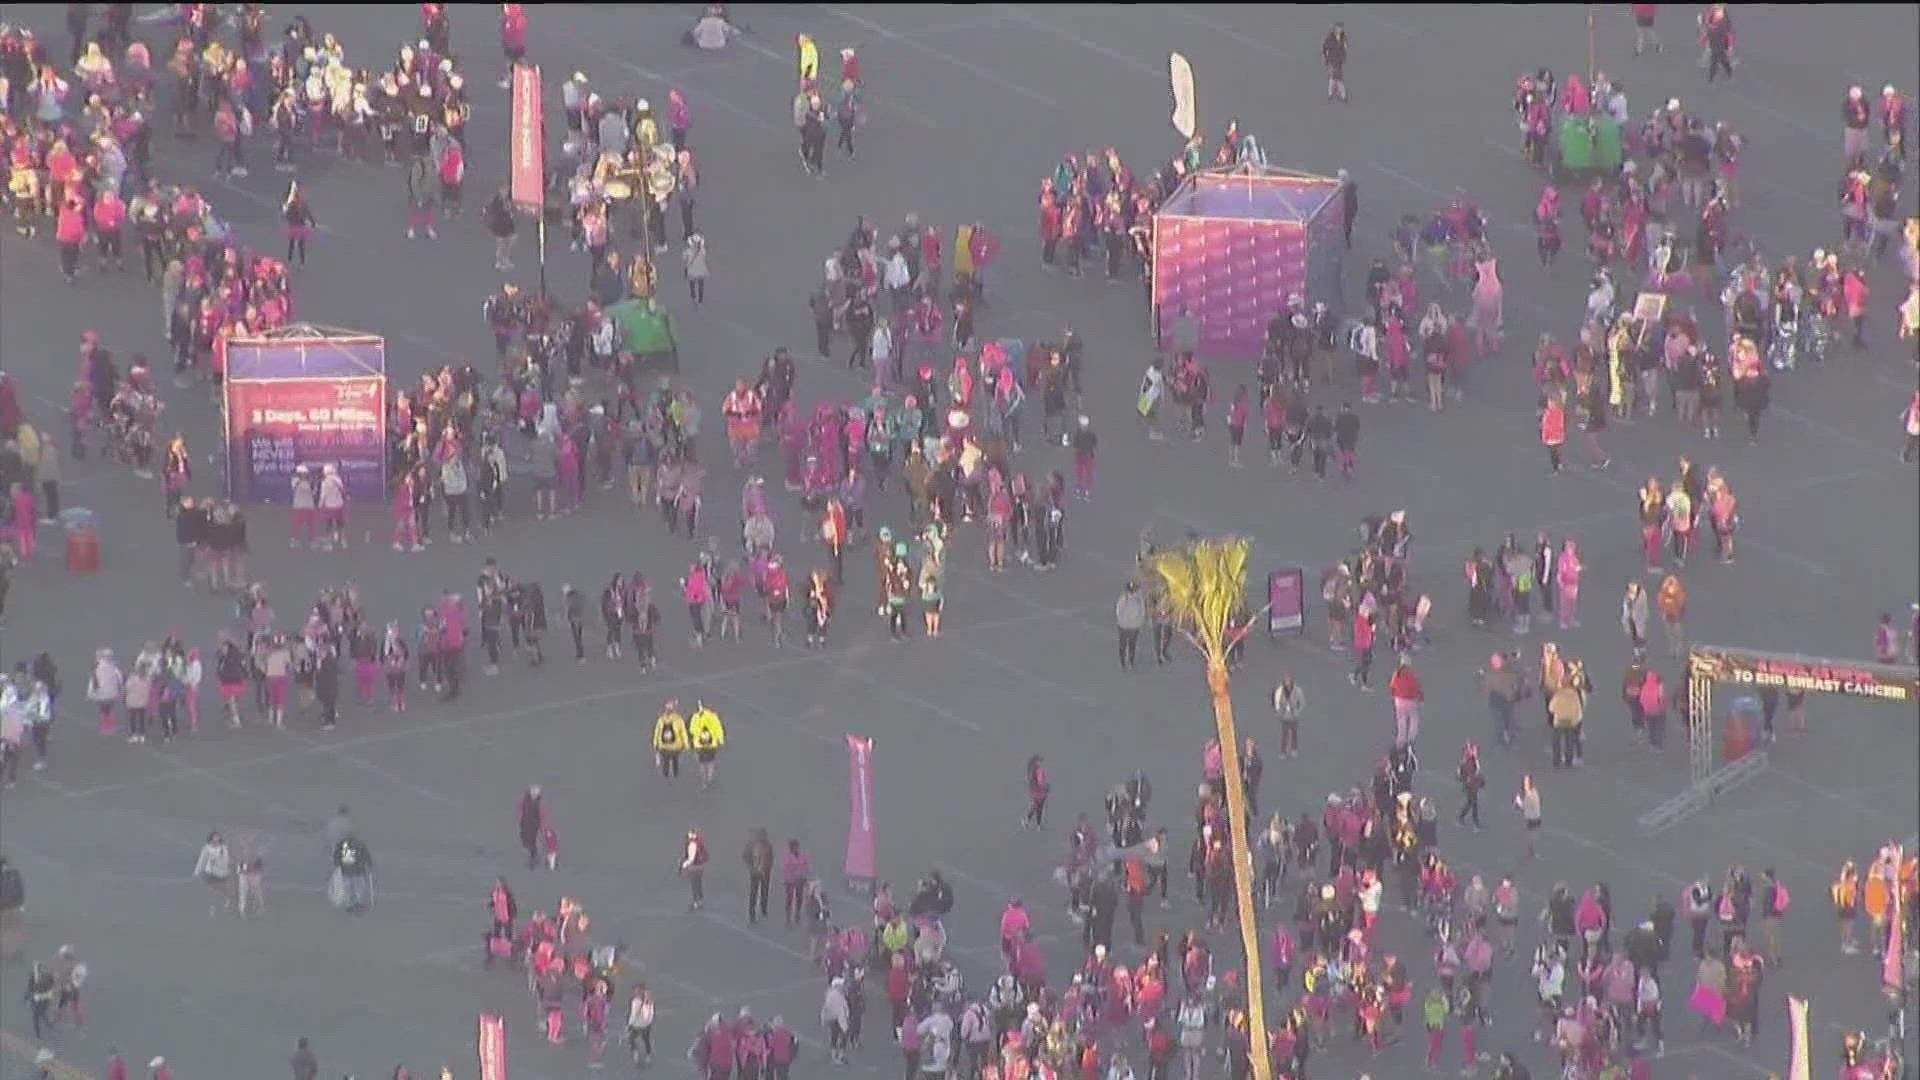 About 2,000 people began their 60-mile walk early Friday morning in a united effort to fight for a world without breast cancer, raising a total of $5.3 million.